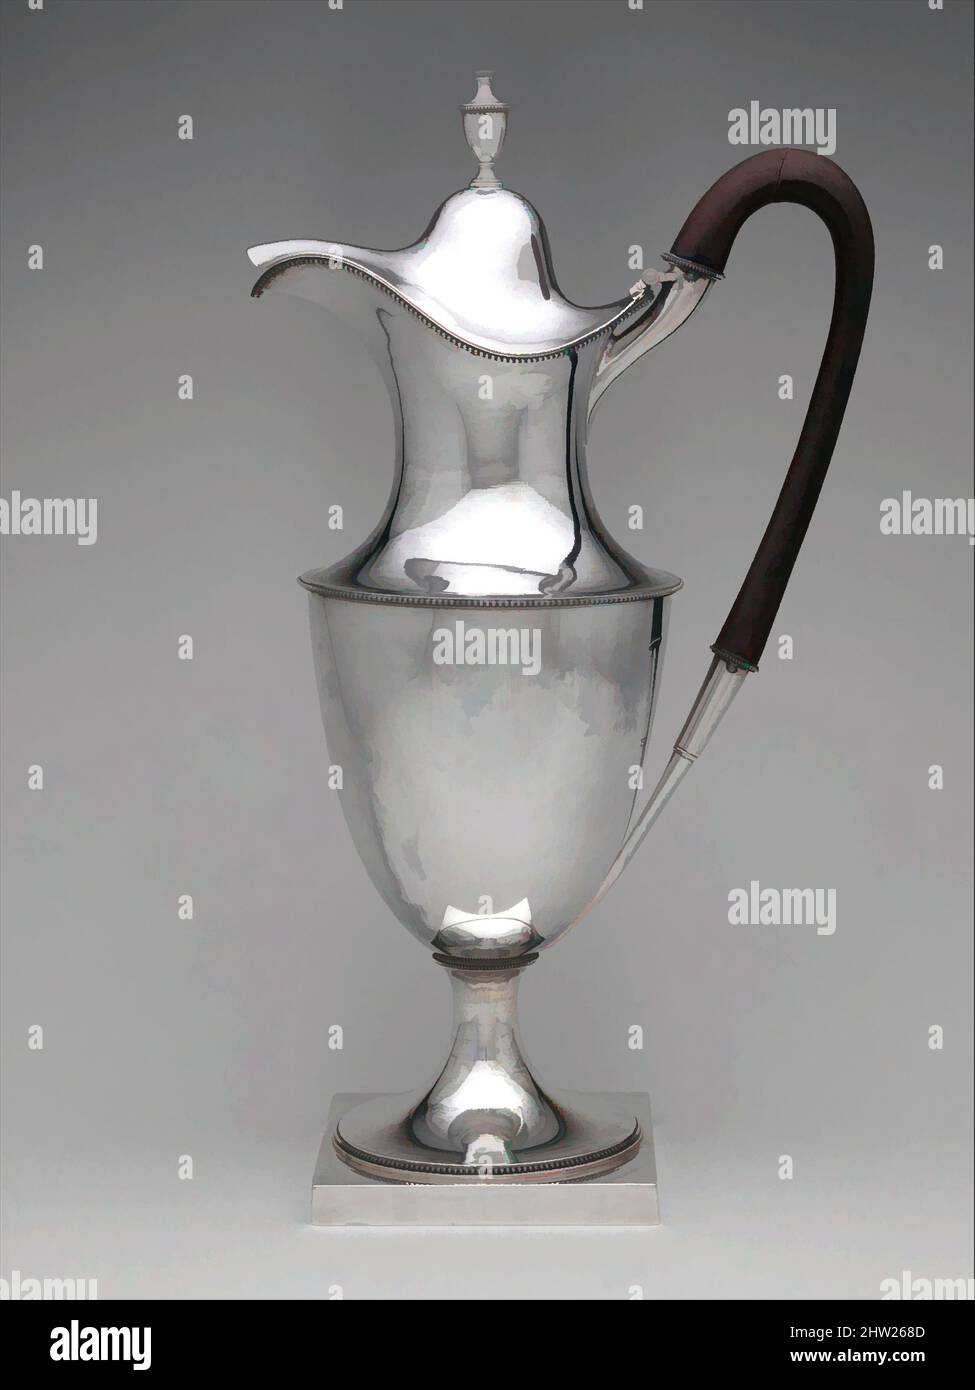 Art inspired by Hot Water Pot, 1791–93, Made in New York, New York, United States, American, Silver, Overall: 14 13/16 x 8 1/4 x 5 in. (37.6 x 21 x 12.7 cm); 35 oz. 17 dwt. (1115.4 g), Silver, Van Voorhis & Schanck (active ca. 1791–93), Daniel Van Voorhis (1751–1824), Garret Schanck (, Classic works modernized by Artotop with a splash of modernity. Shapes, color and value, eye-catching visual impact on art. Emotions through freedom of artworks in a contemporary way. A timeless message pursuing a wildly creative new direction. Artists turning to the digital medium and creating the Artotop NFT Stock Photo